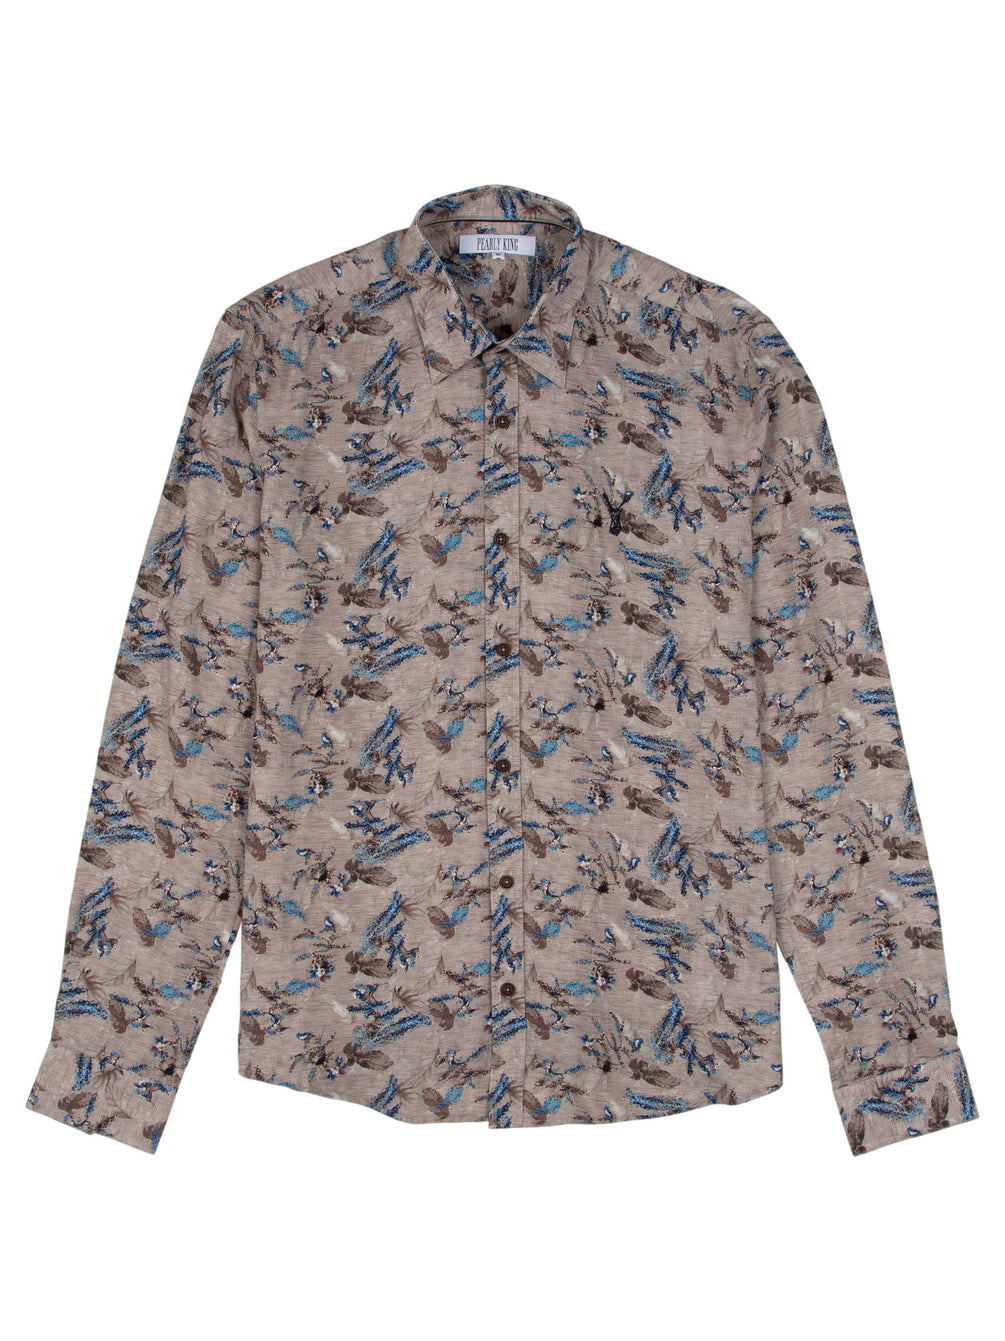 Pearly King - Glare LS Shirt - Blue